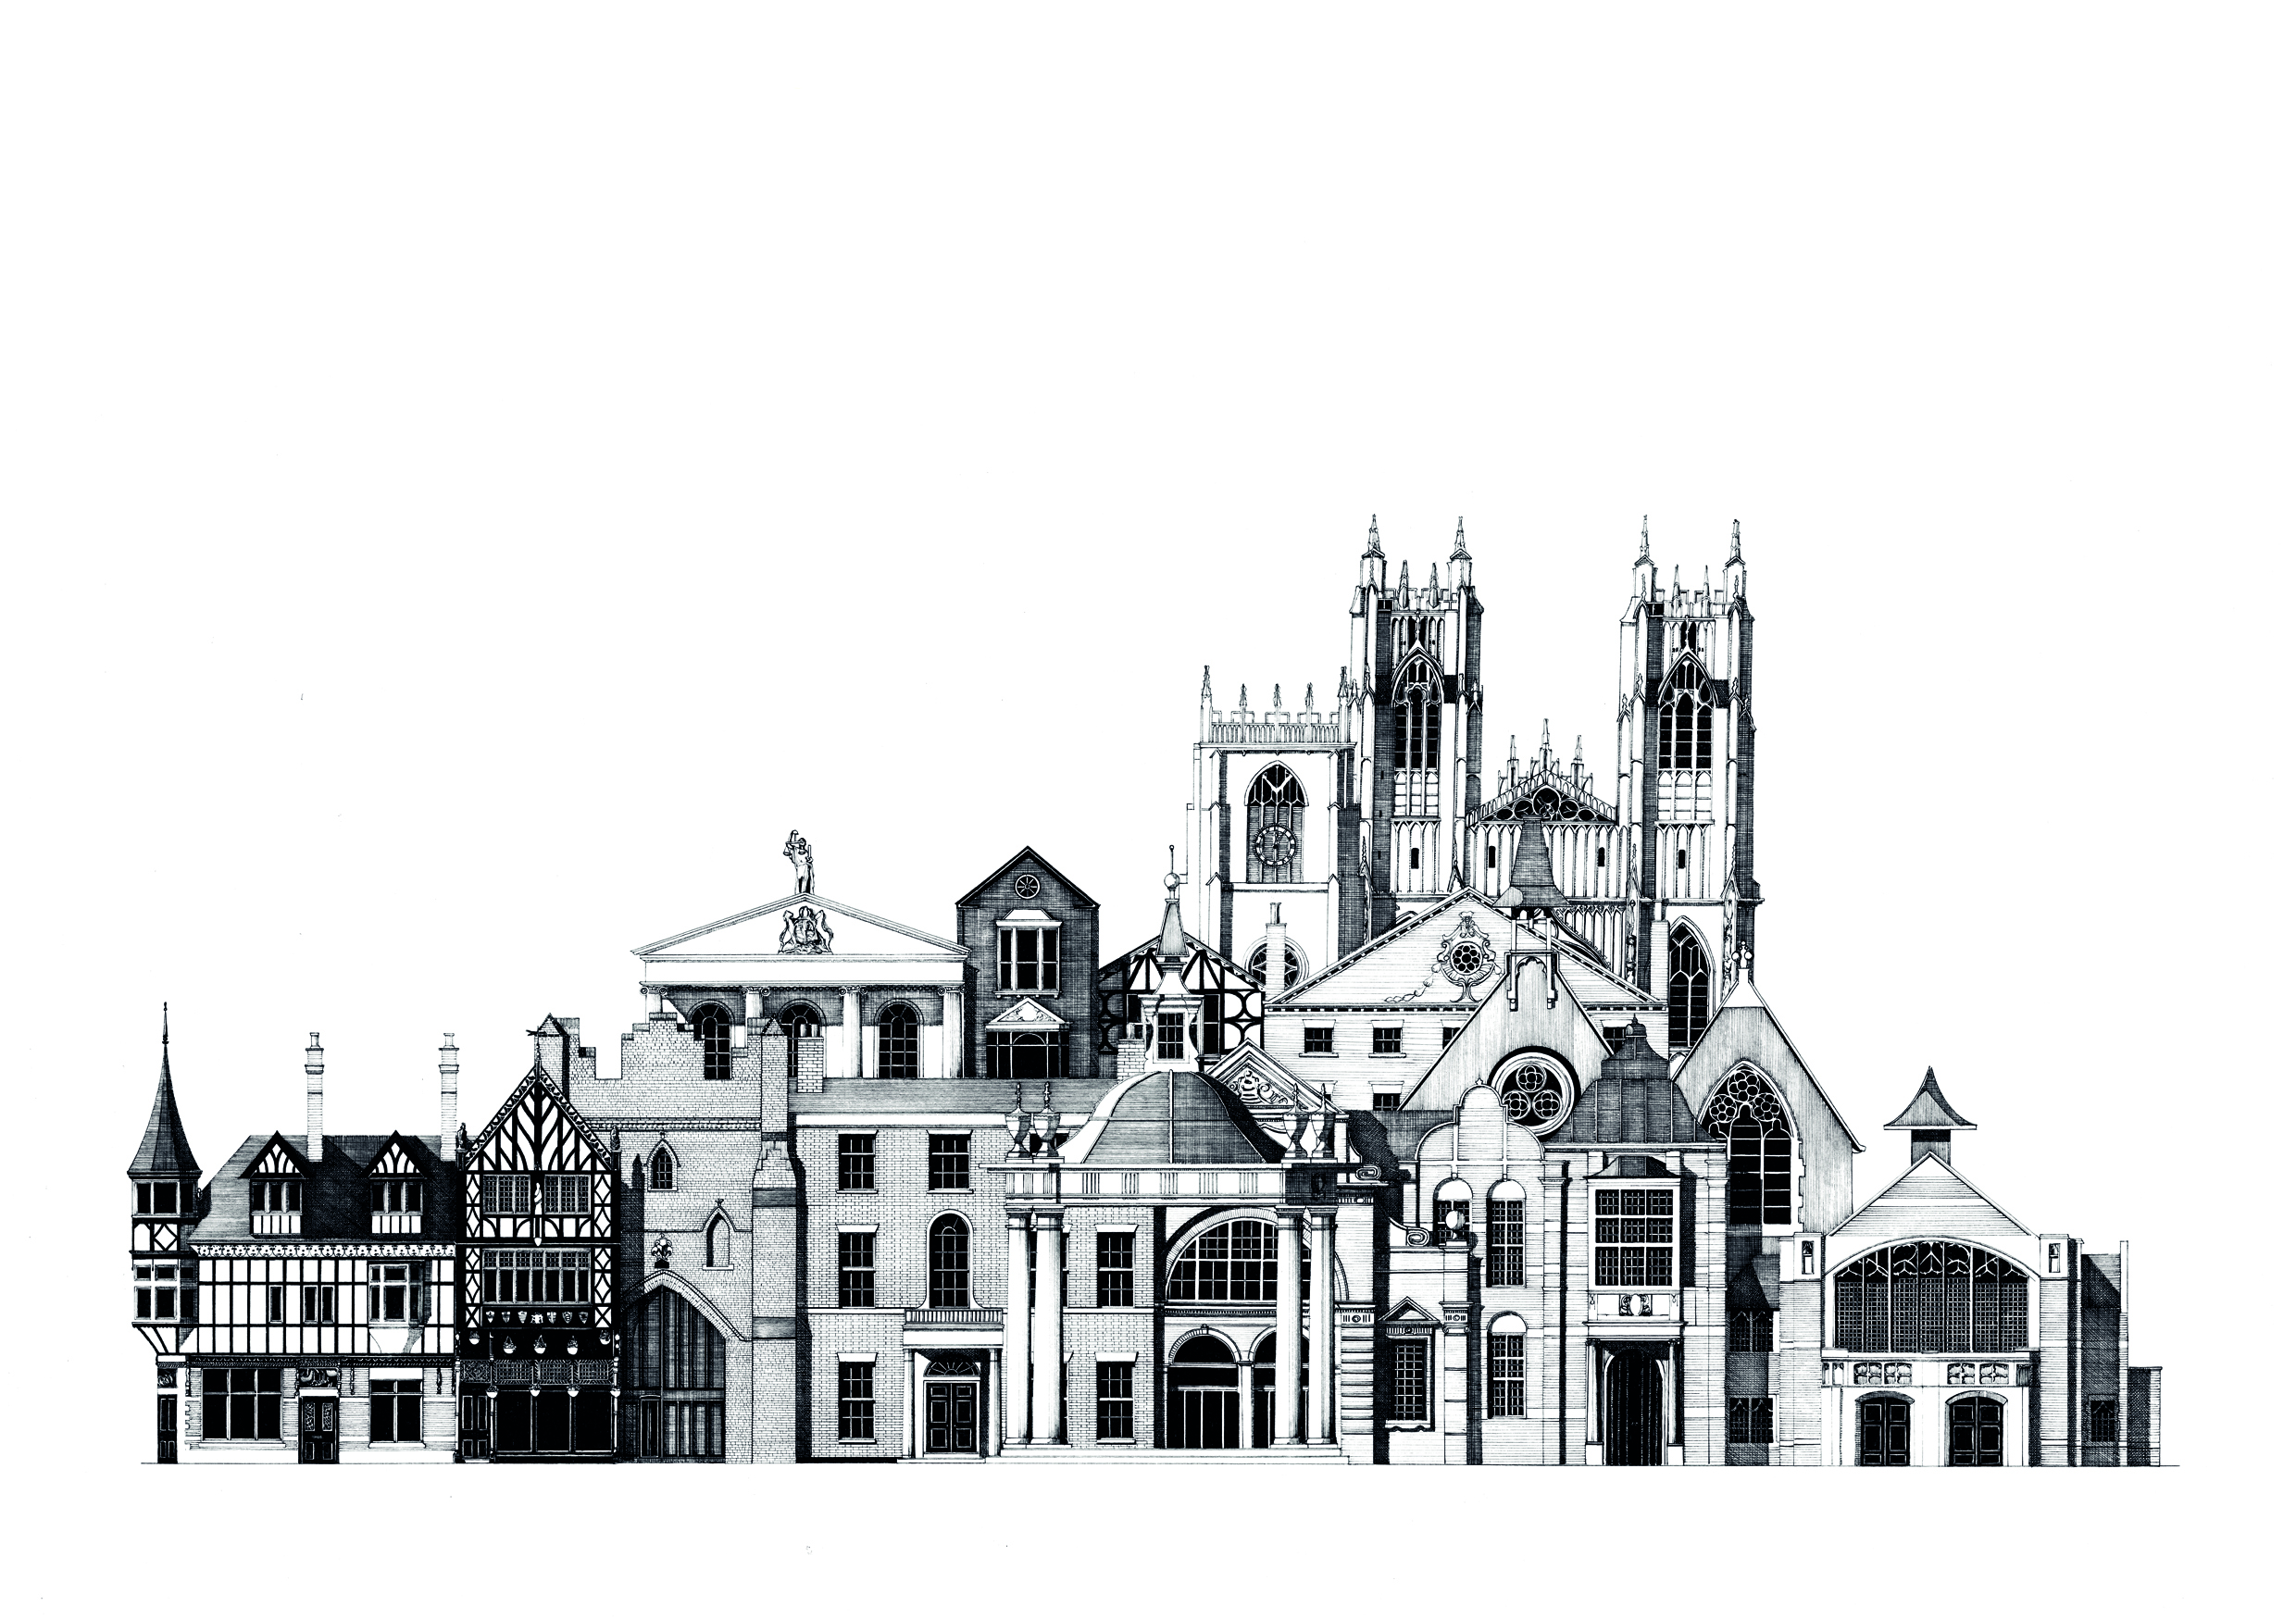 Beverley Architectural Panorama